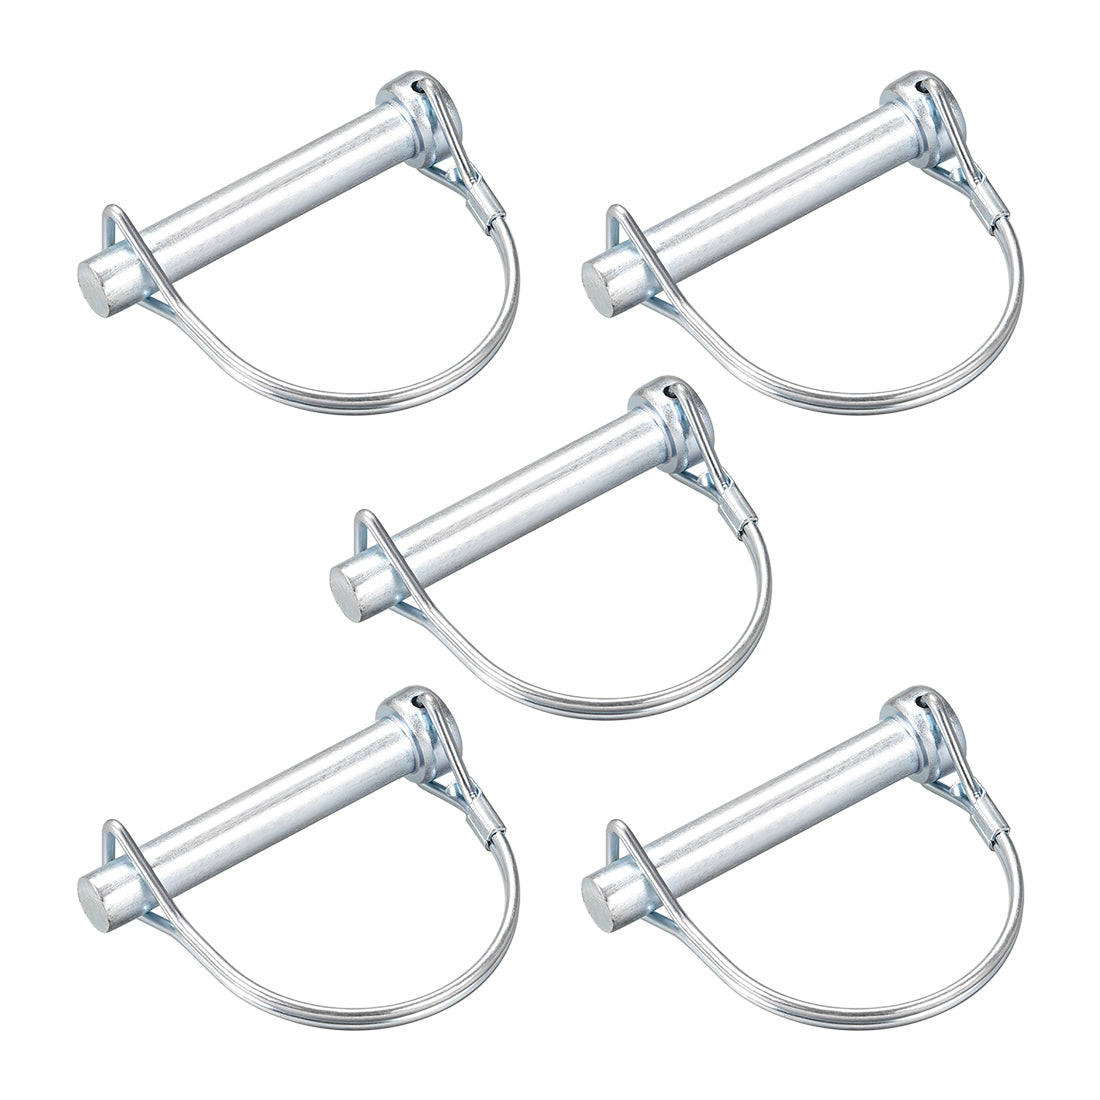 uxcell Uxcell Shaft Locking Pin 10mmx60mm Coupler Pin for Farm Trailers Lawn Arch 5Pcs